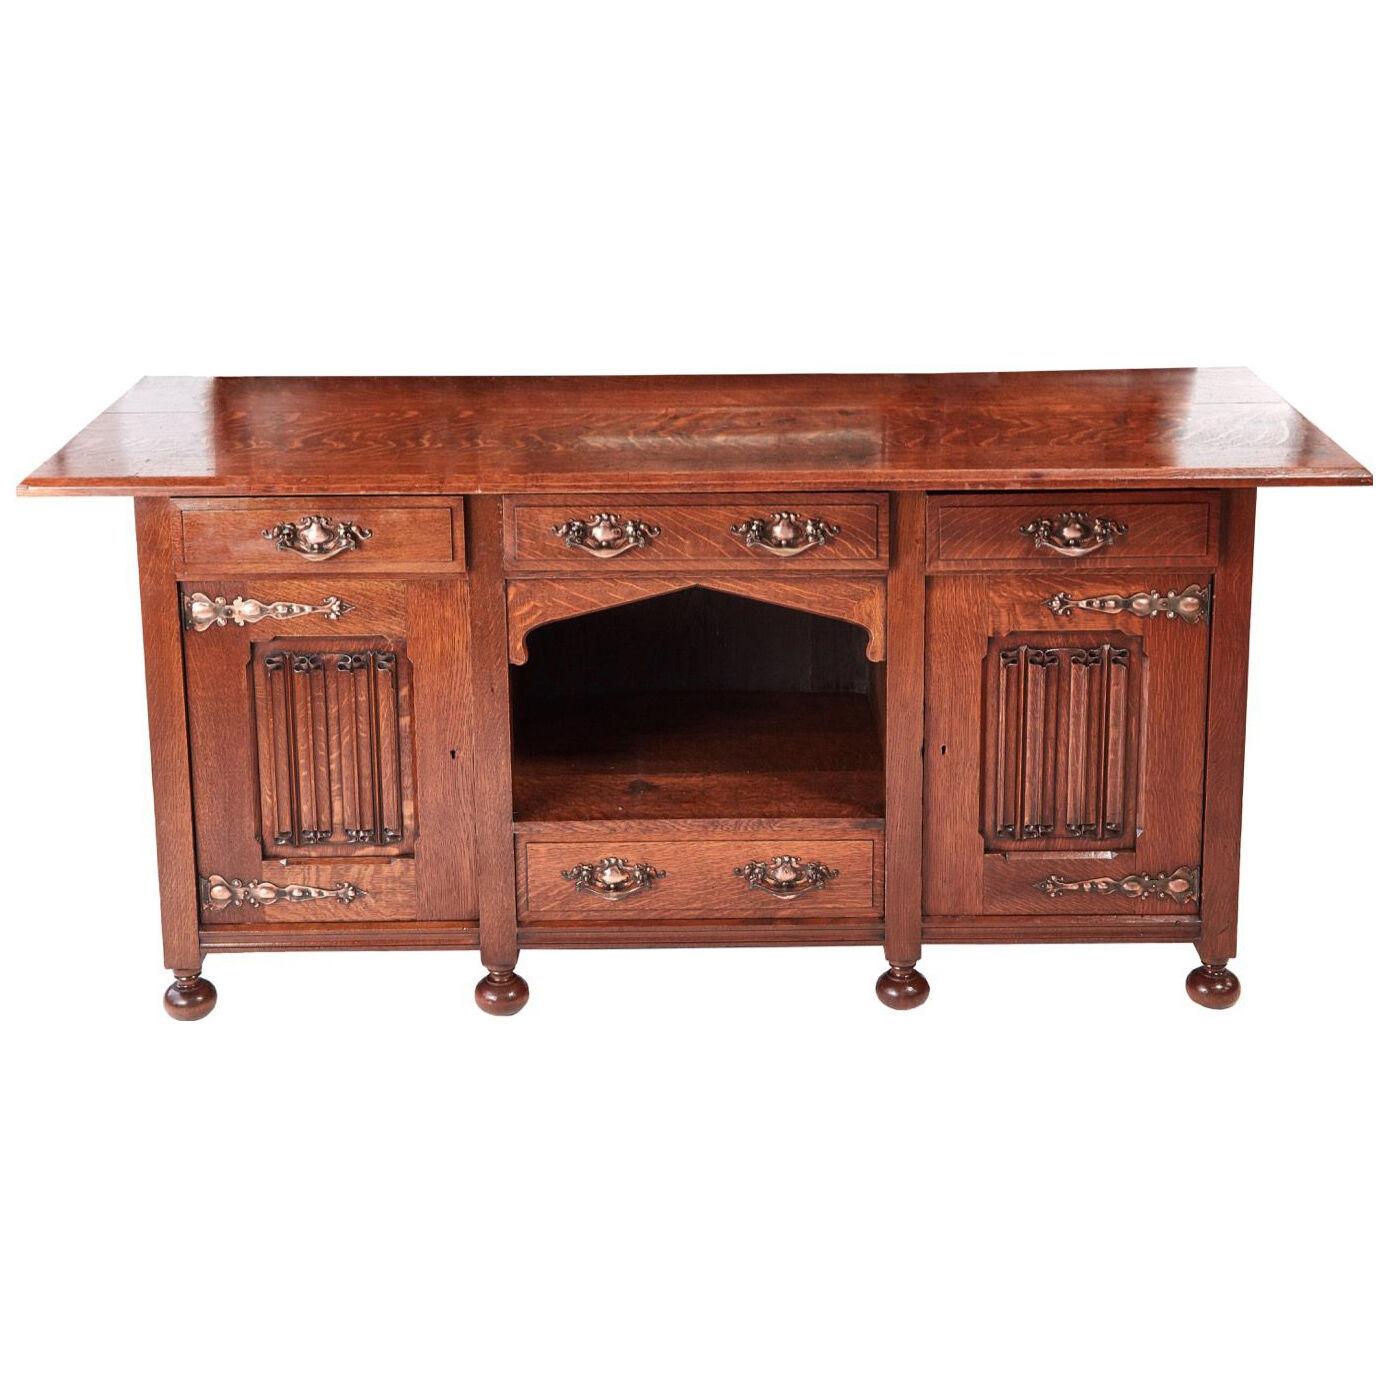 Outstanding Quality Oak Arts & Crafts Sideboard